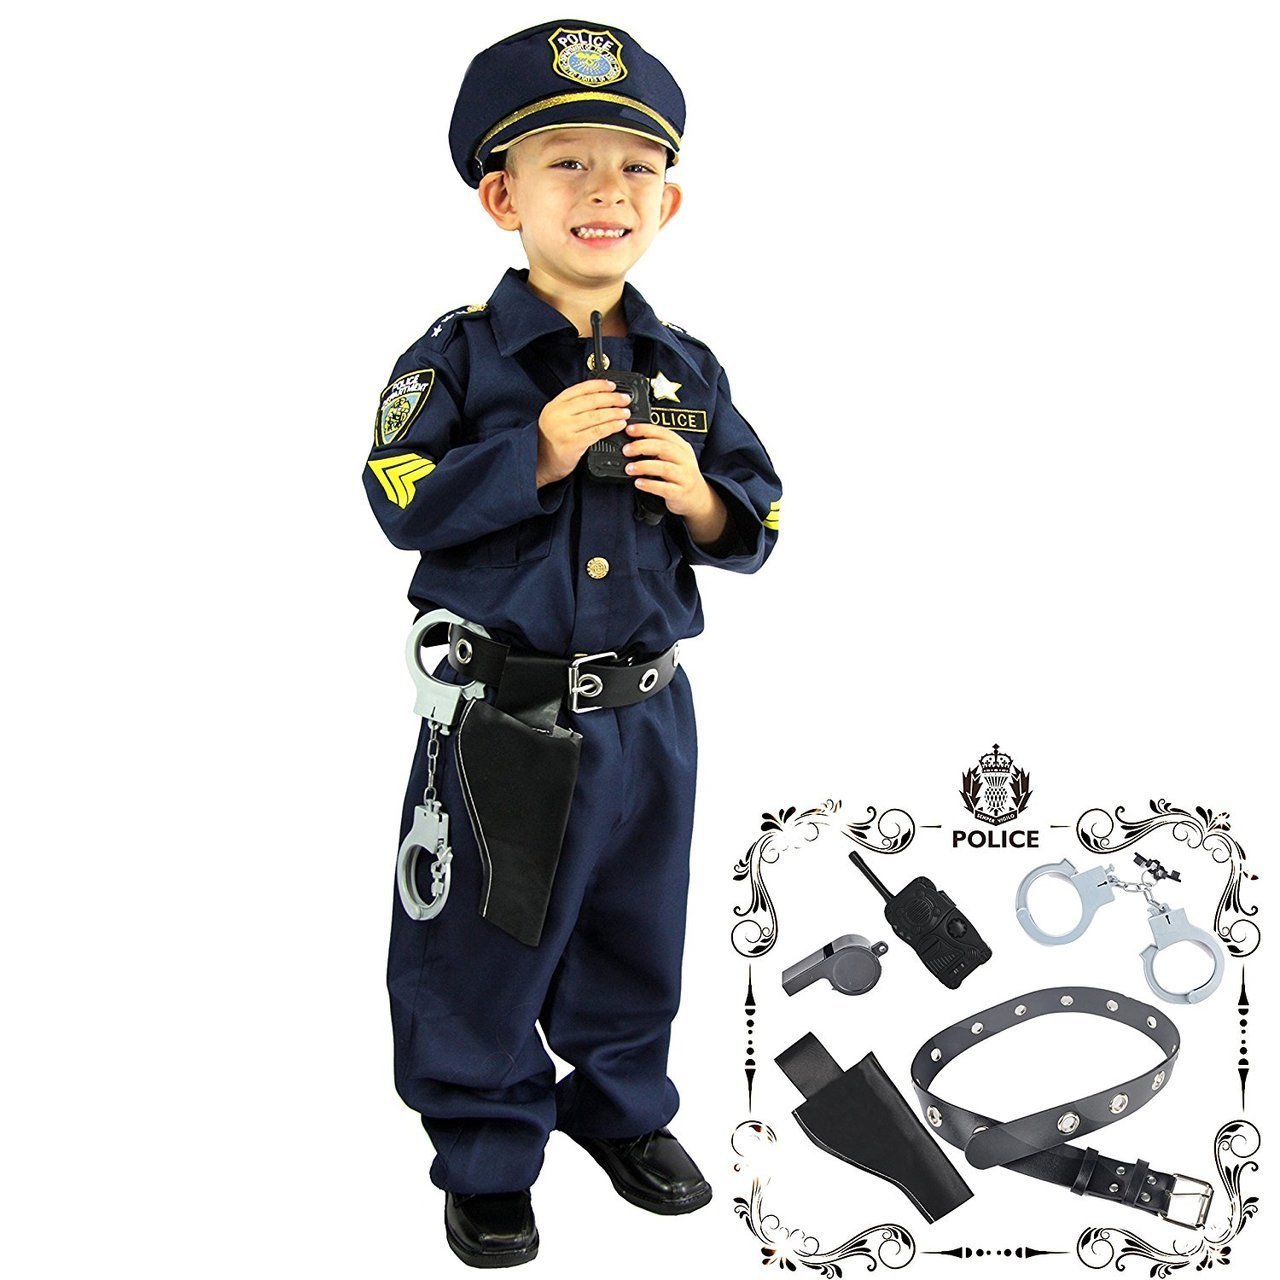 Police Costume, Déguisements Police